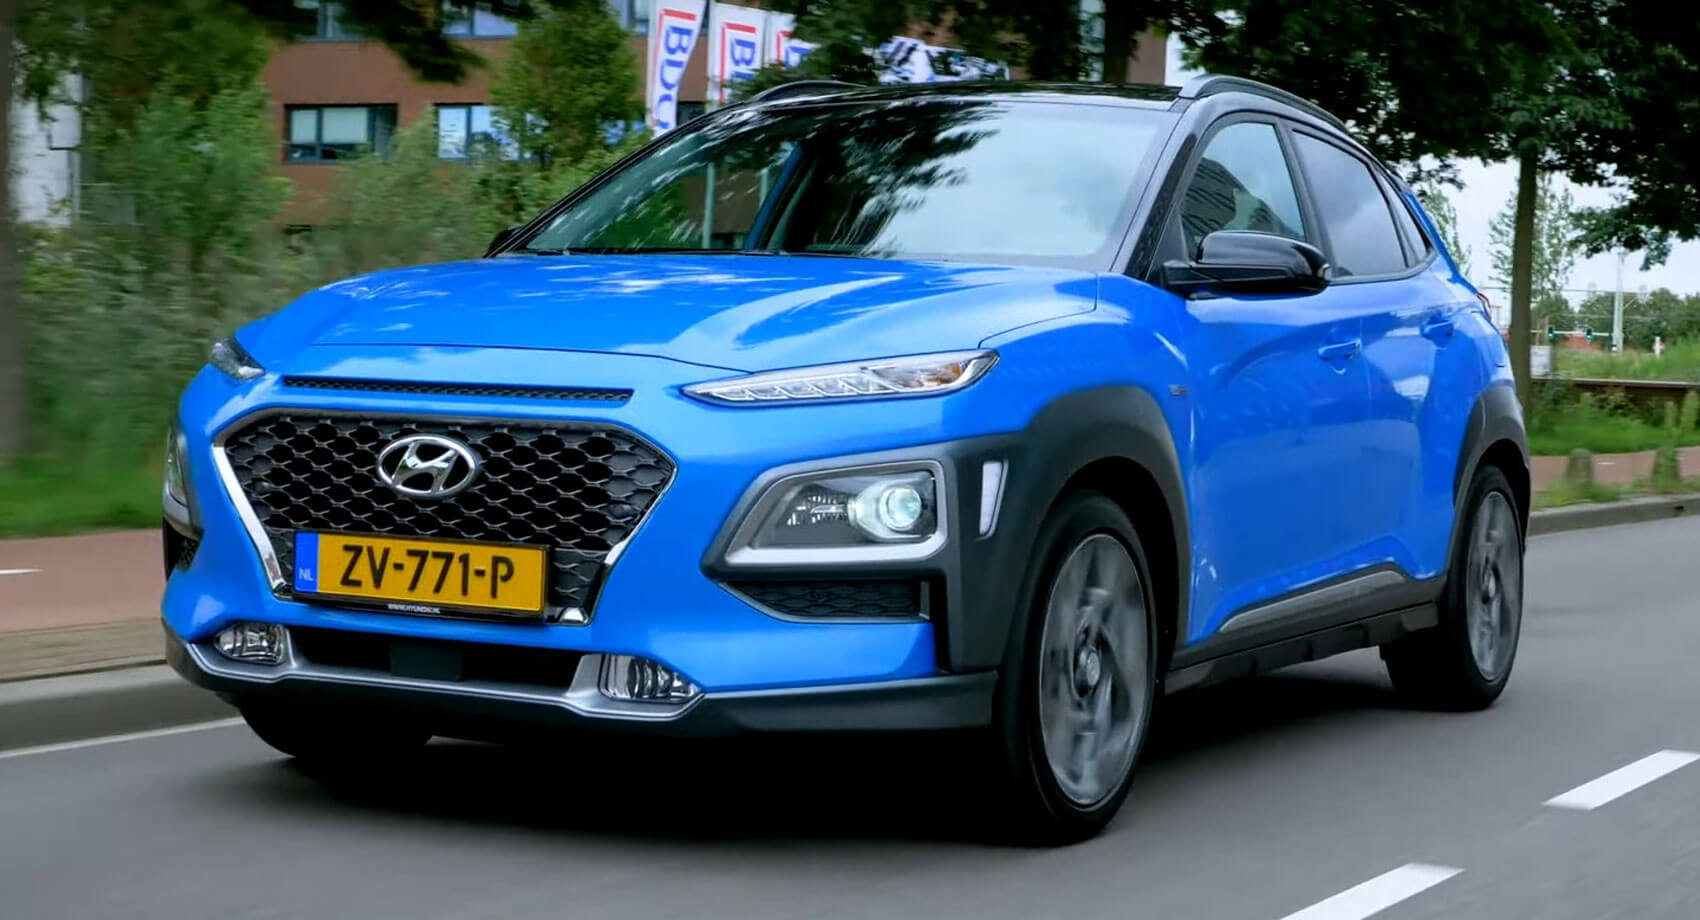 Hyundai Kona Hybrid Is A Funky Looking Small SUV With An Electric ...